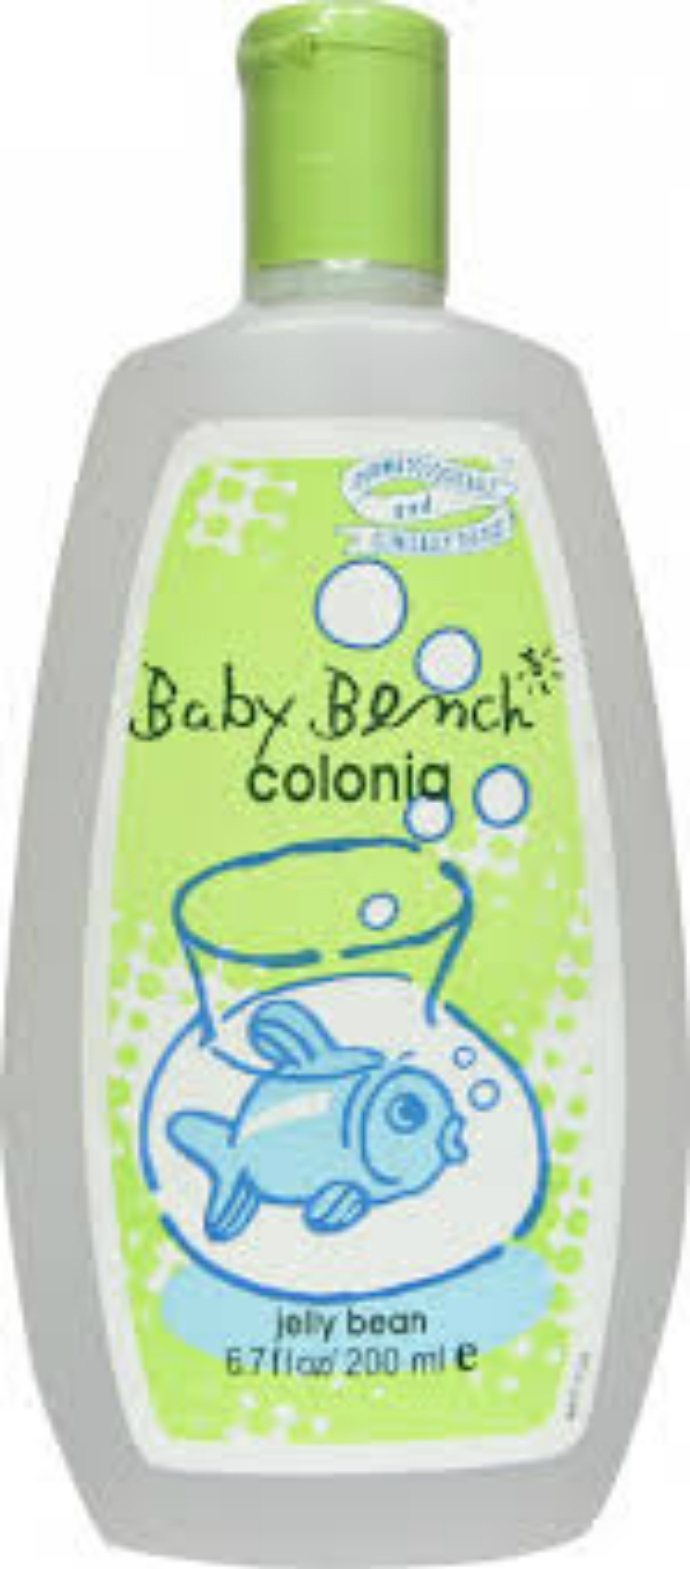 BENCH Baby Bench Jelly Bean Cologne 200ml (MOS)